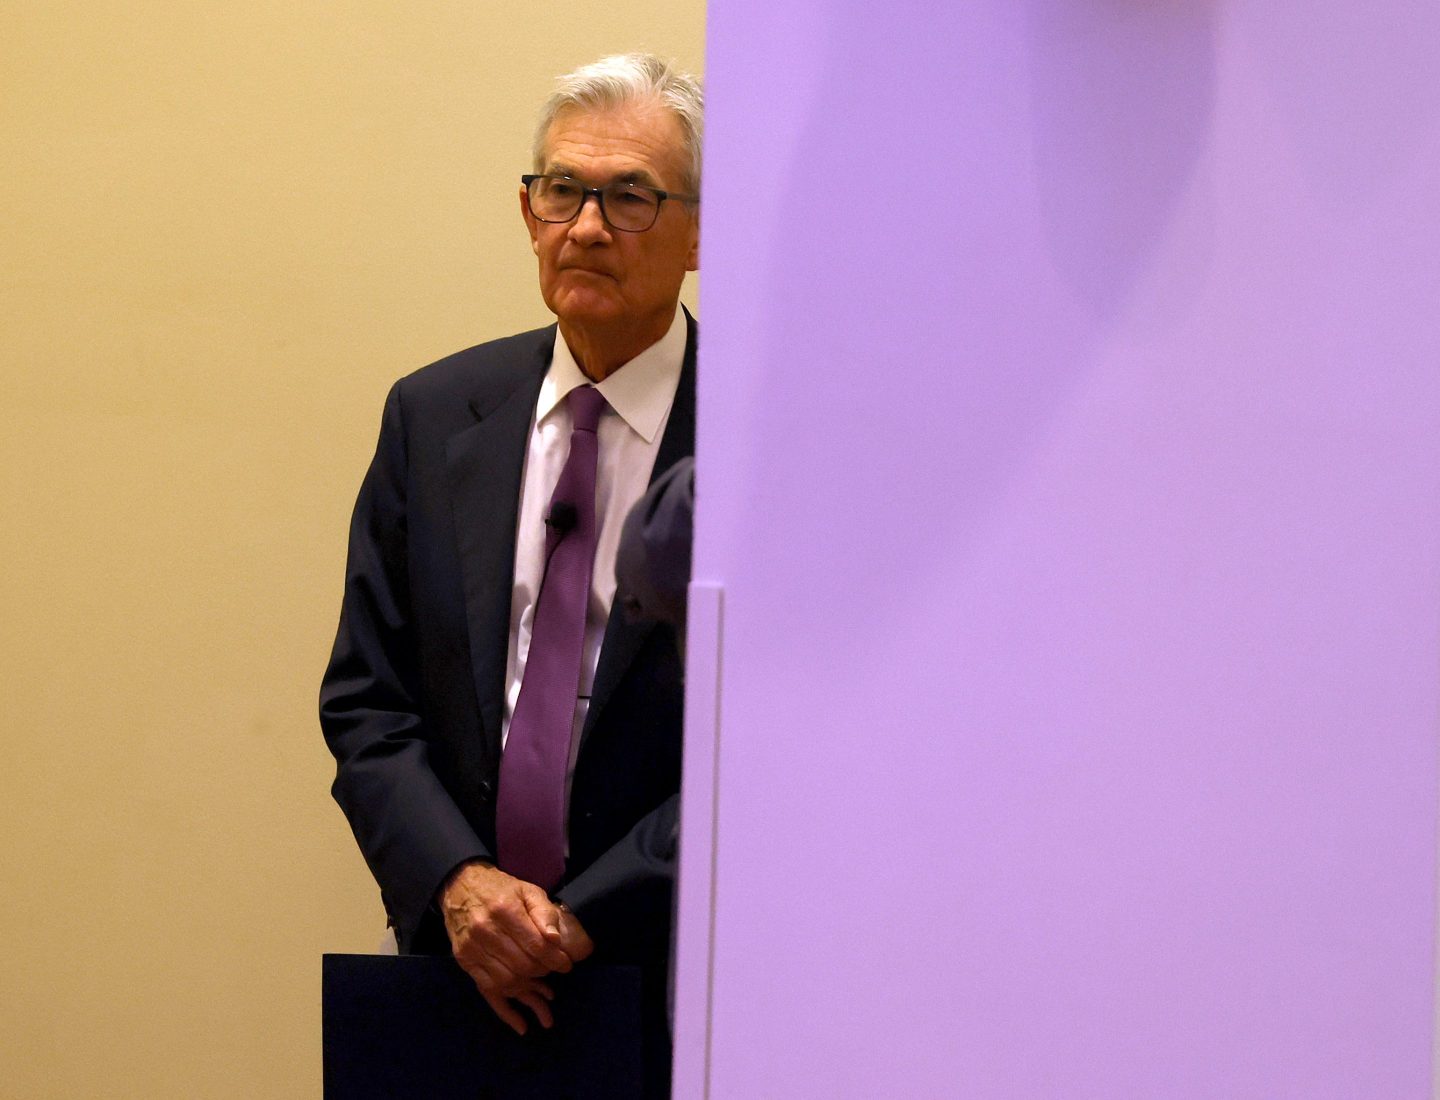 Jerome Powell looks on before speaking